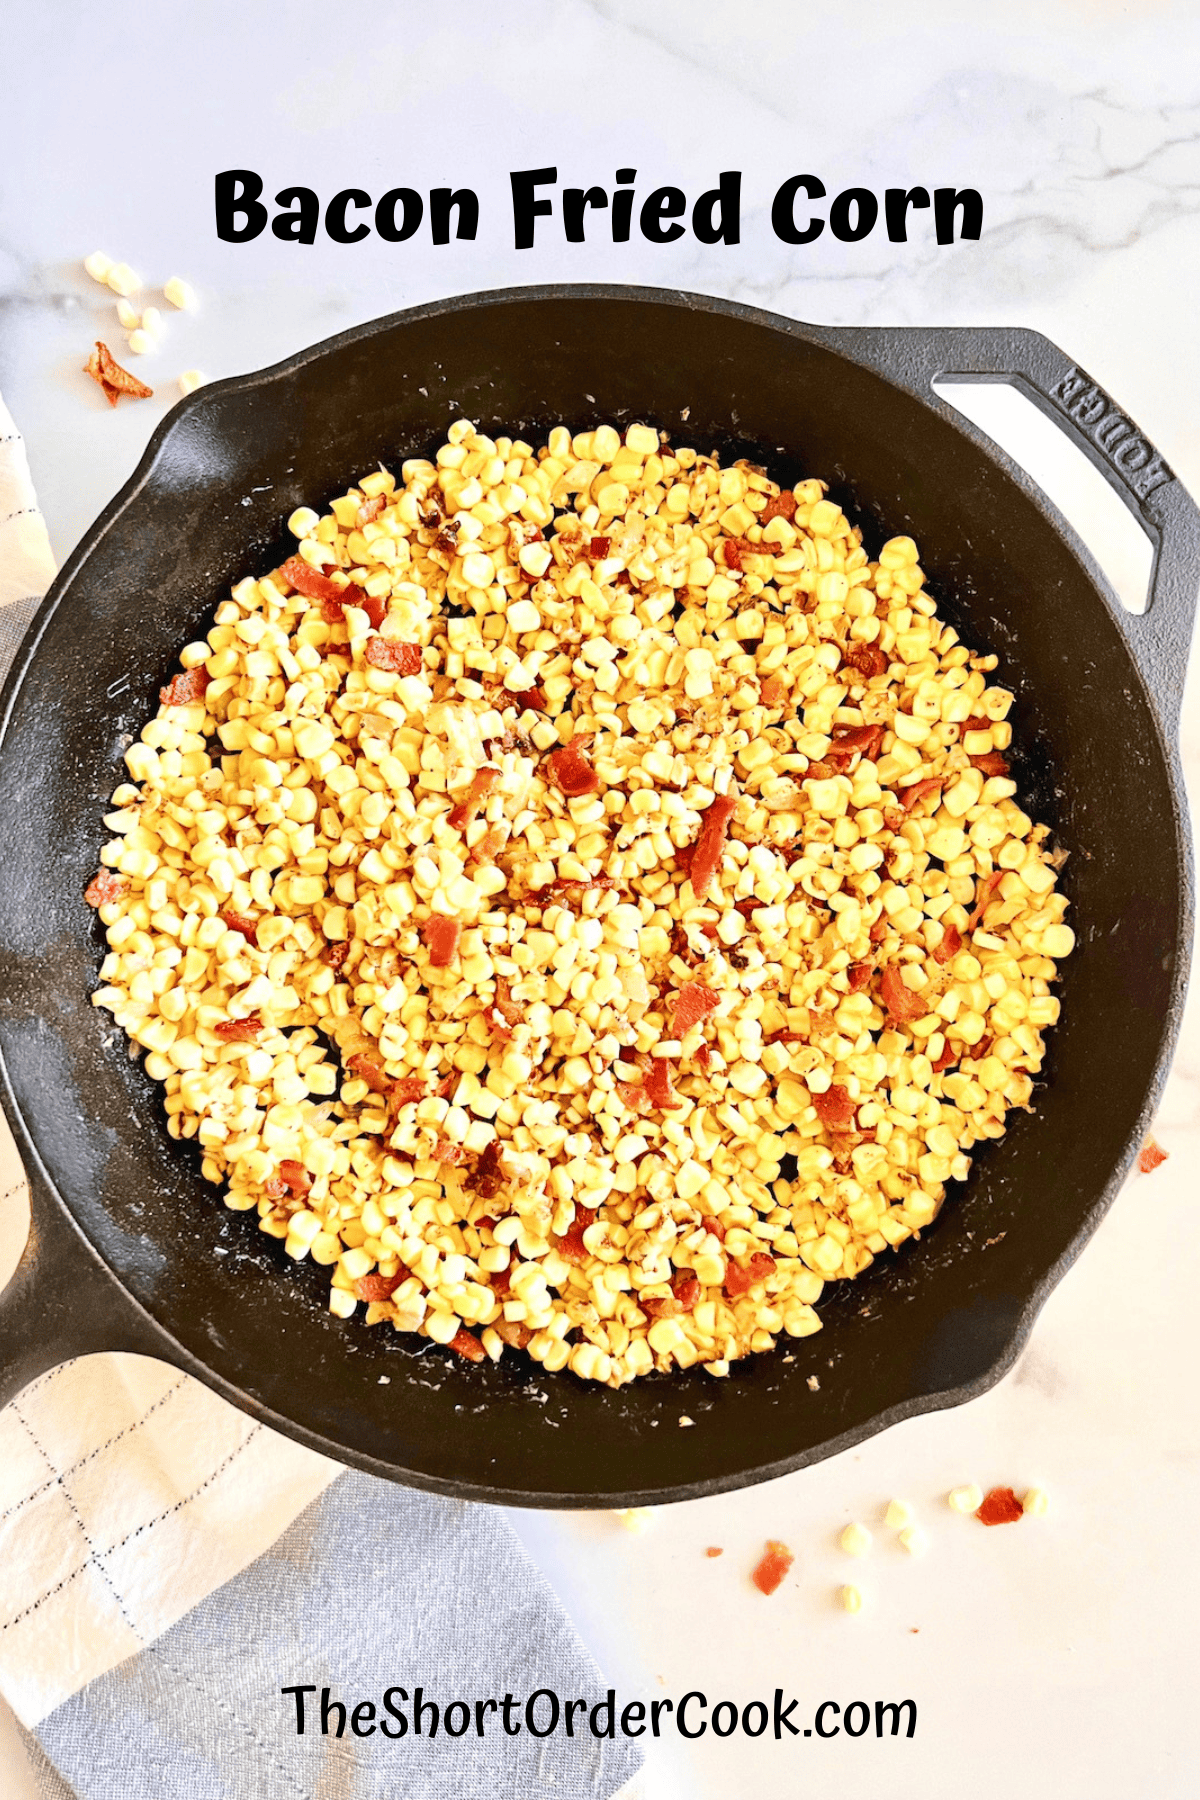 Bacon fried corn in a cast iron skillet.